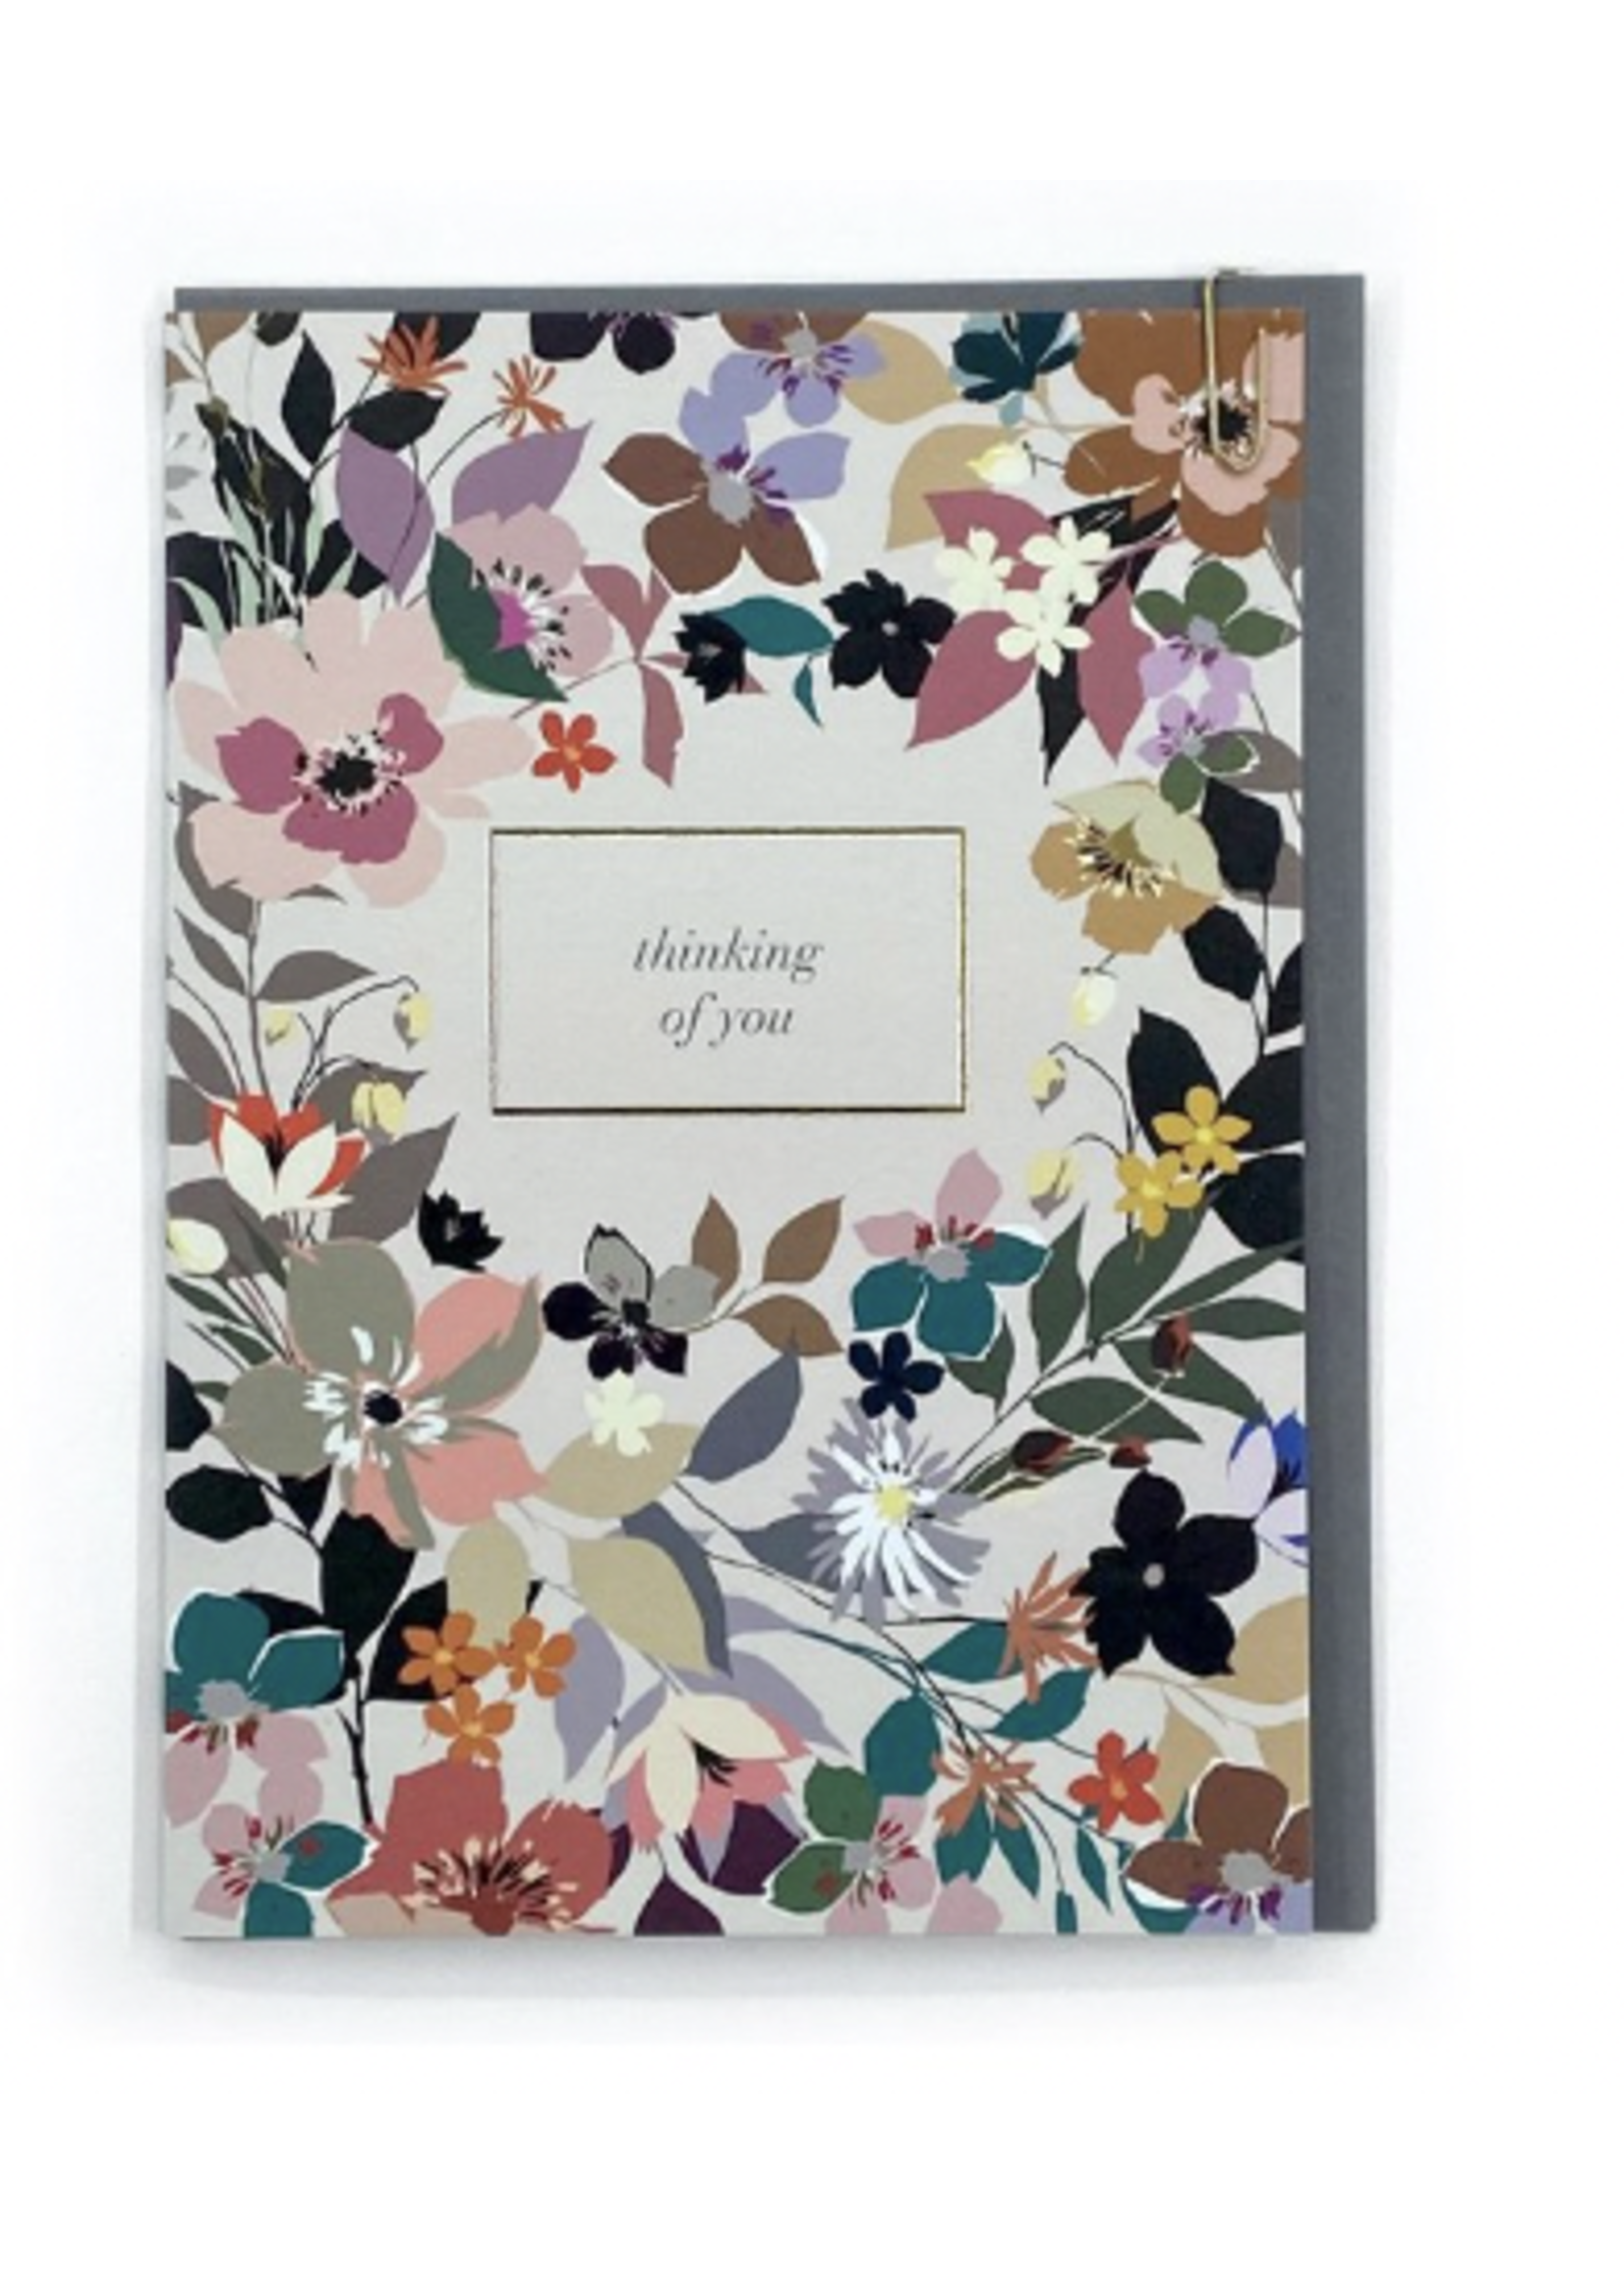 Pavilion Swatch Floral "Thinking of You" card